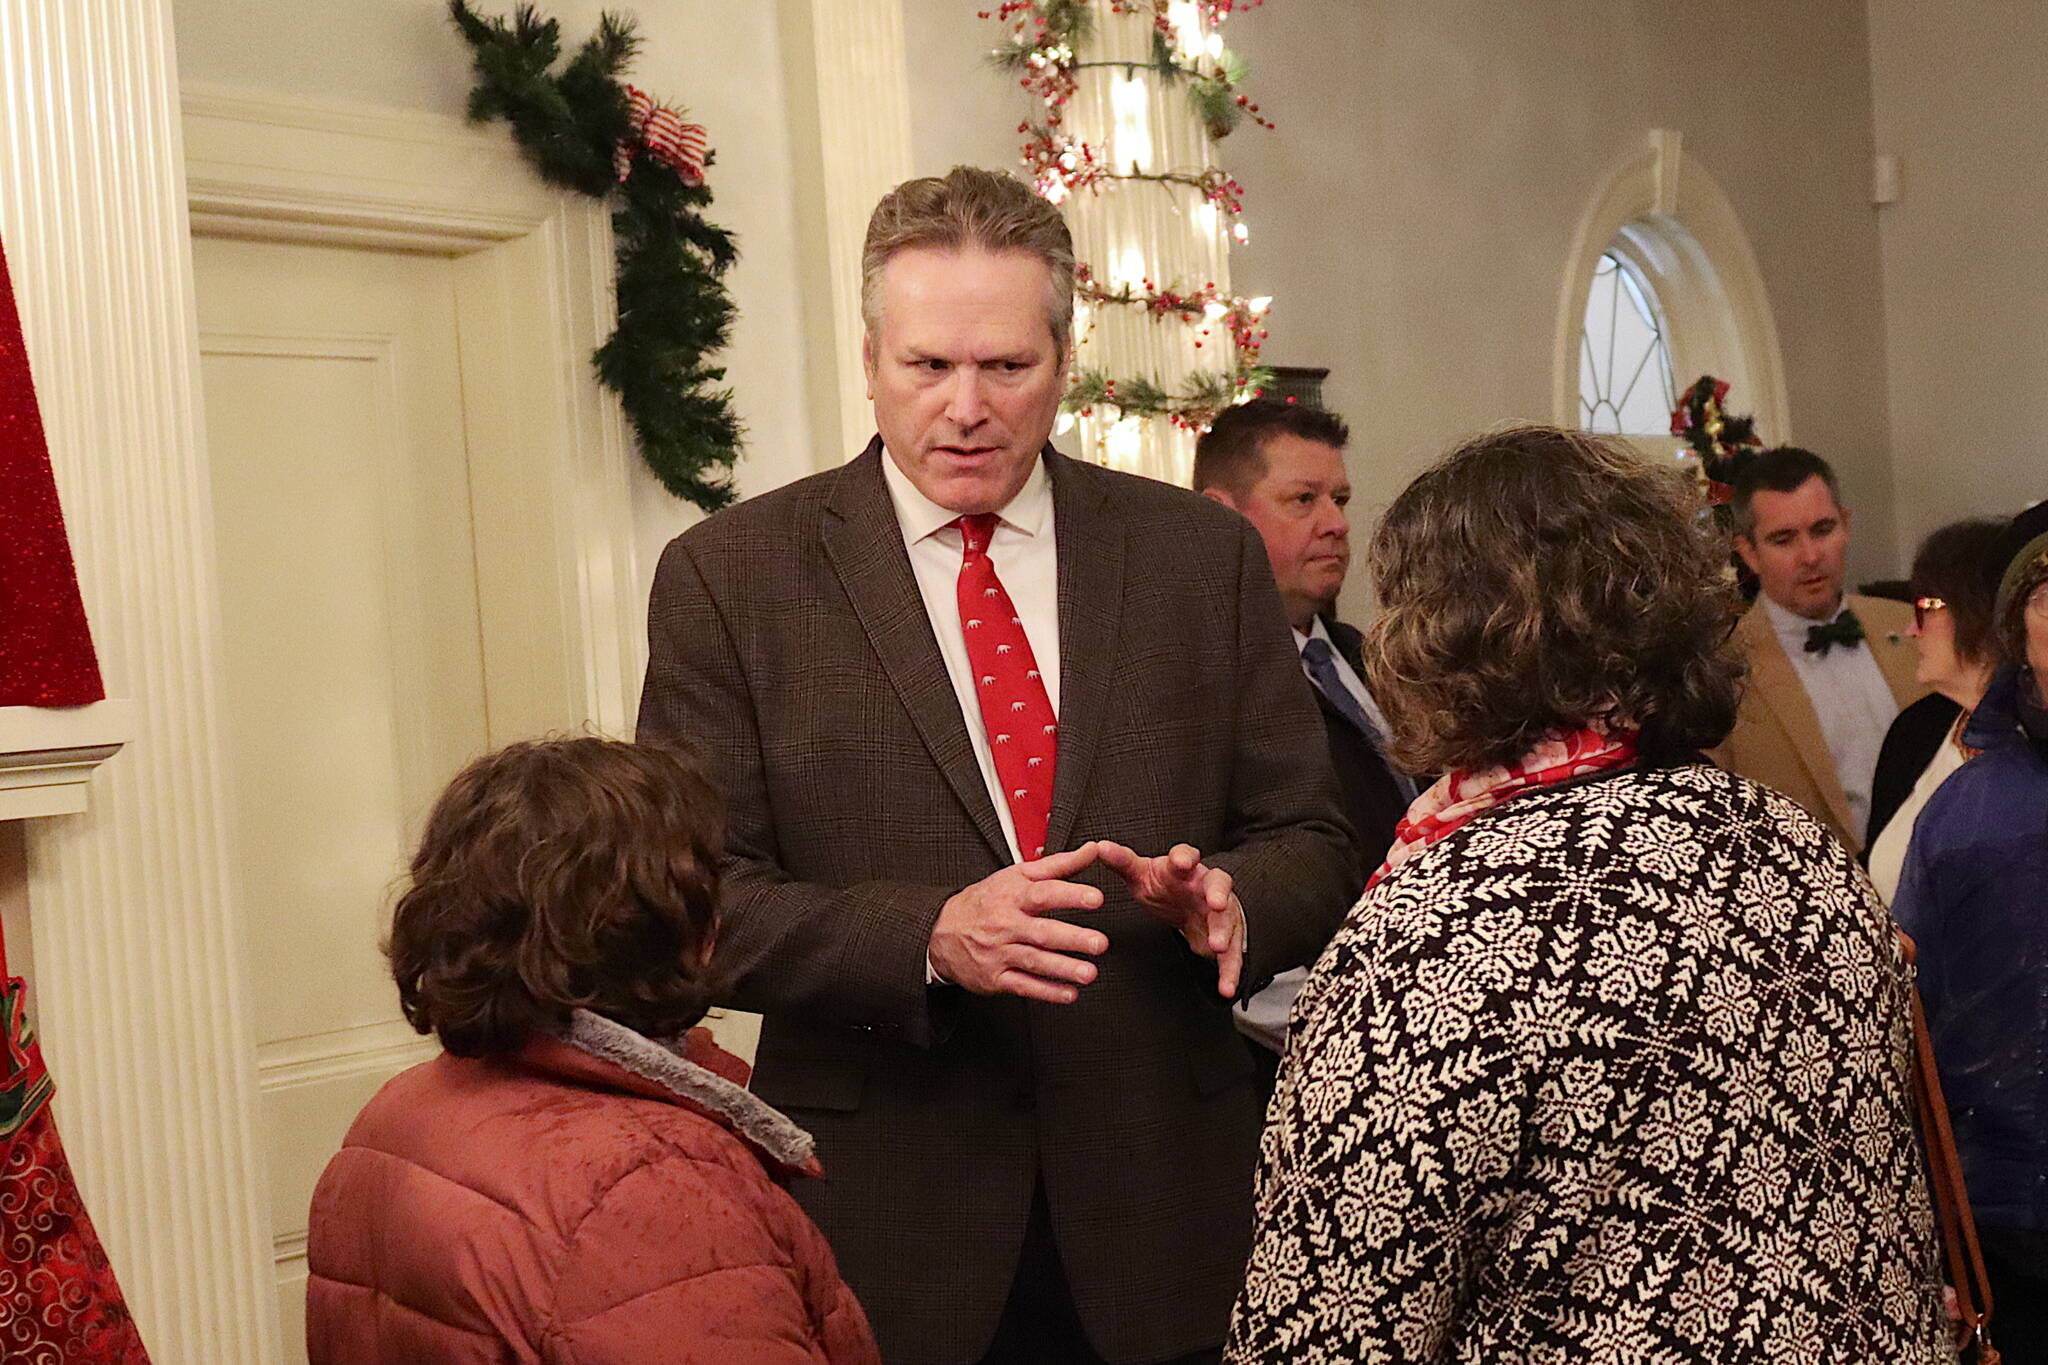 Gov. Mike Dunleavy greets visitors during the annual Holiday Open House at the Governor’s Residence on Tuesday. (Mark Sabbatini / Juneau Empire)